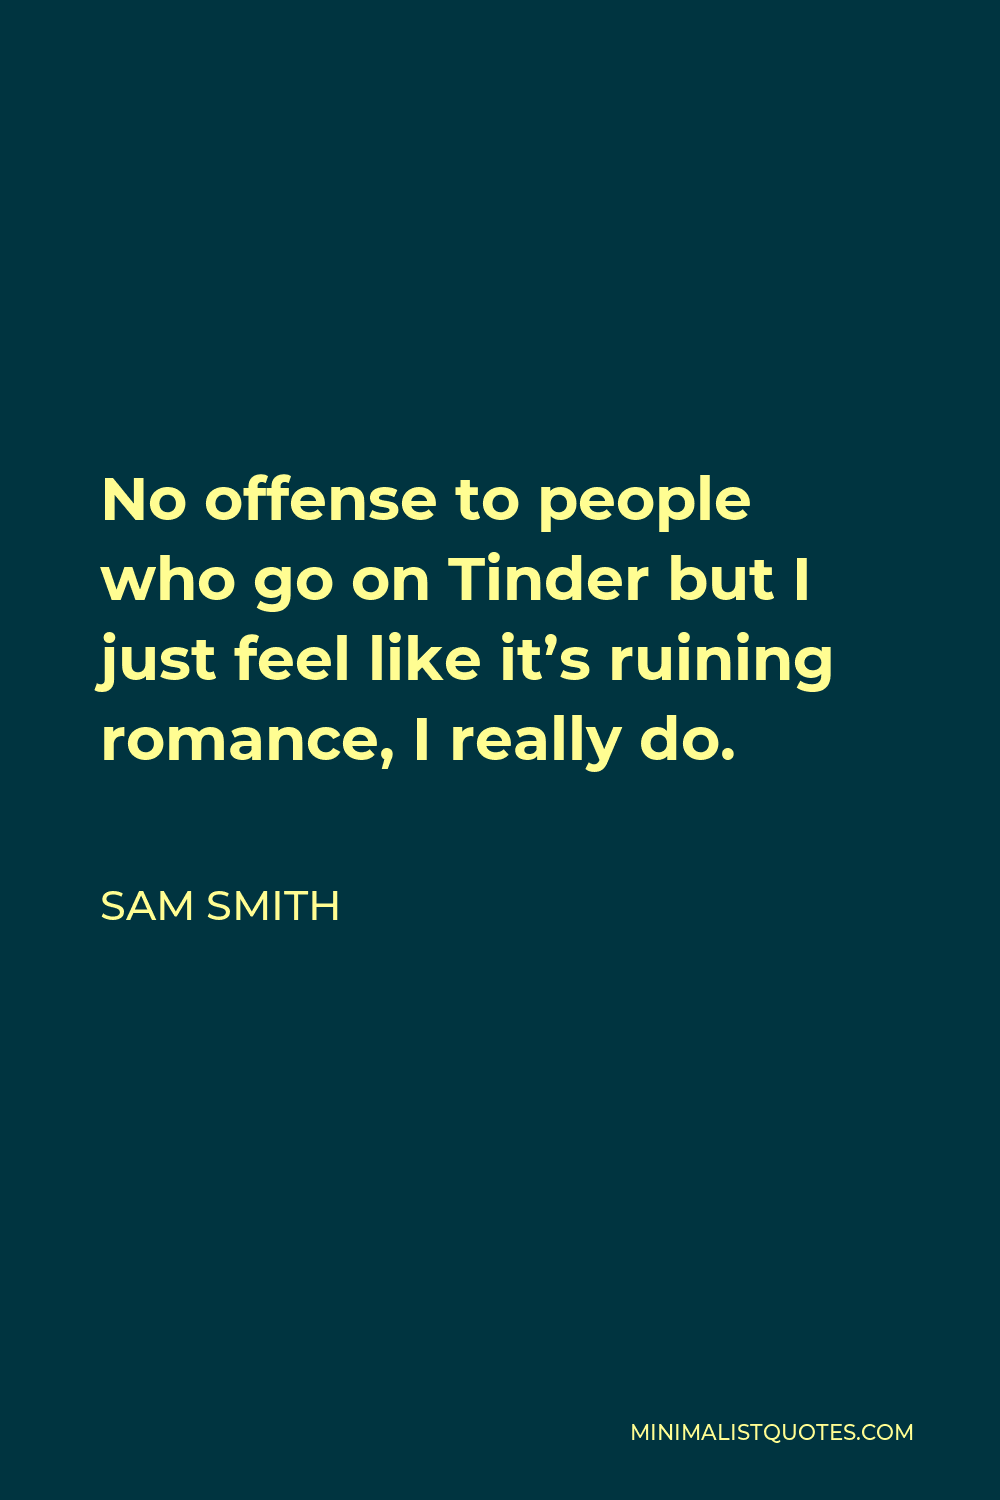 Sam Smith Quote - No offense to people who go on Tinder but I just feel like it’s ruining romance, I really do.